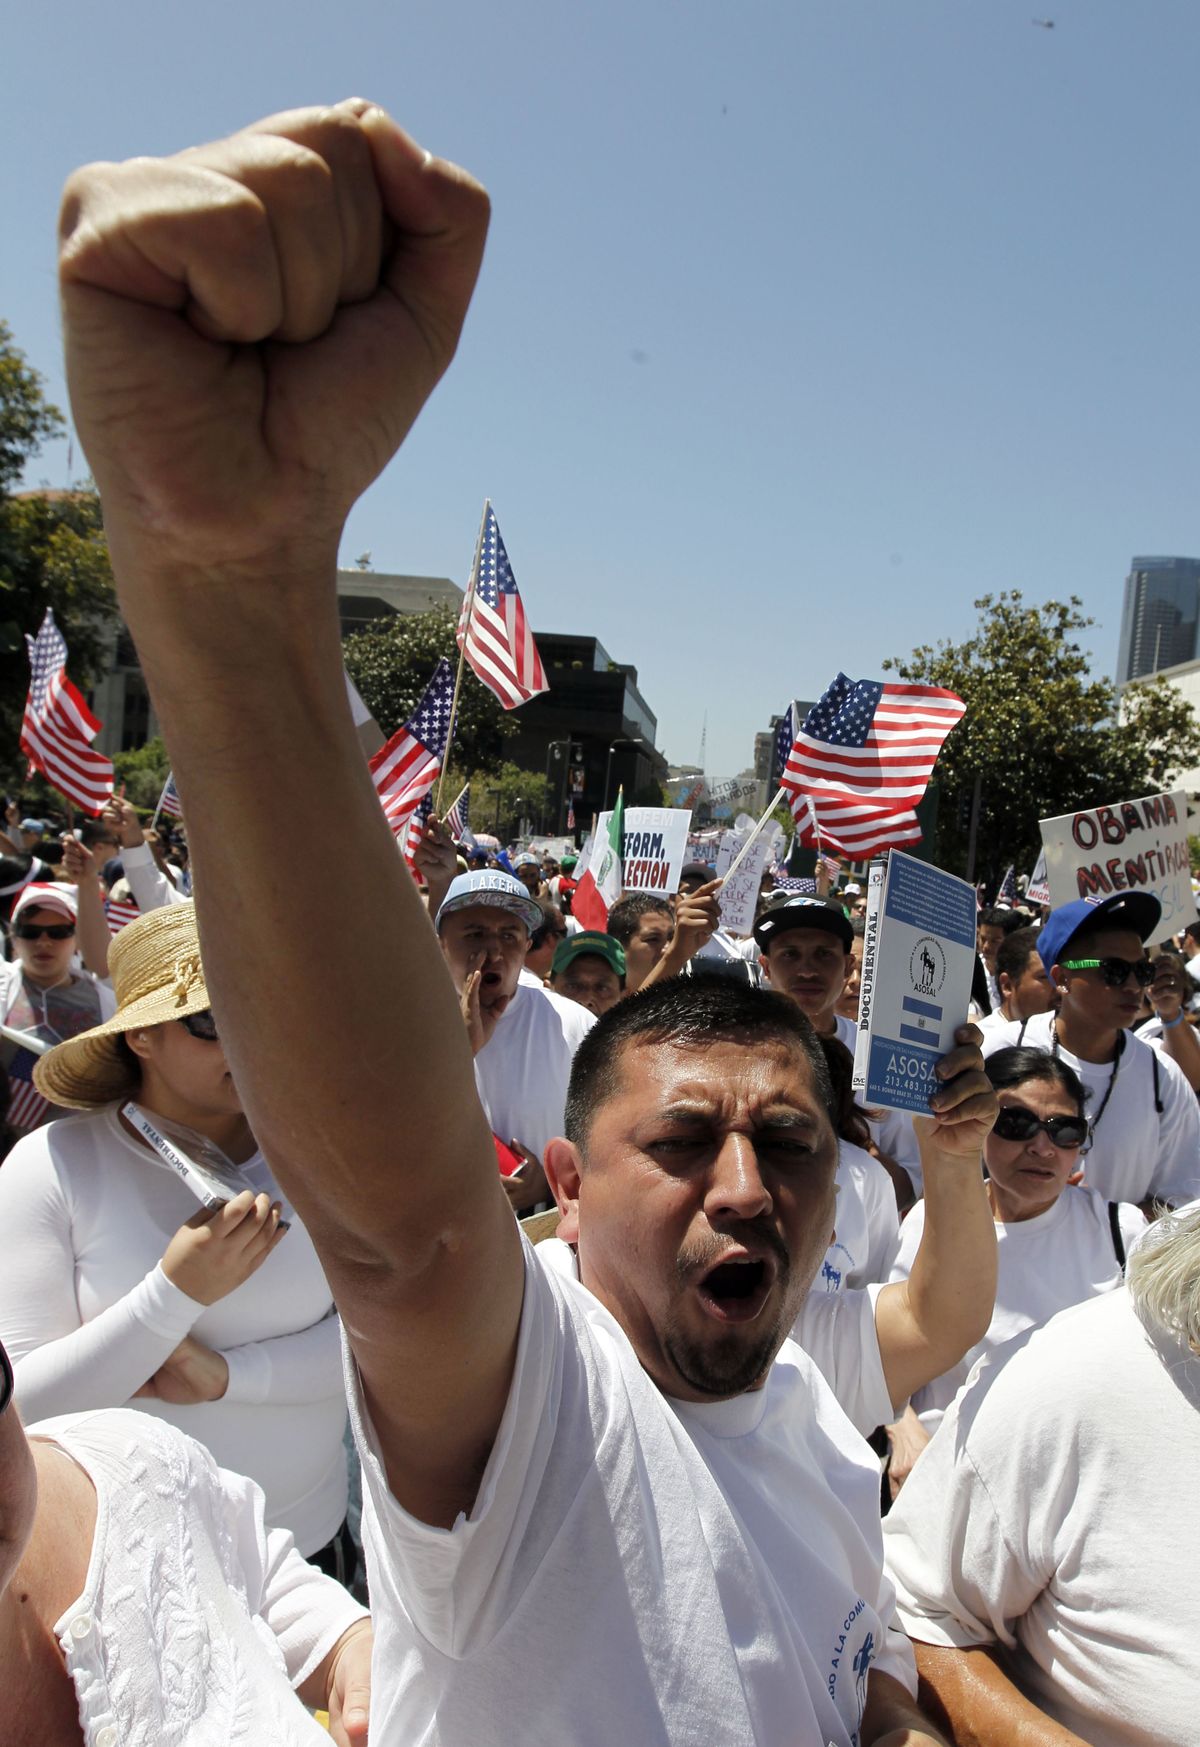 A man raises his fist at the rally  in downtown Los Angeles on Saturday.